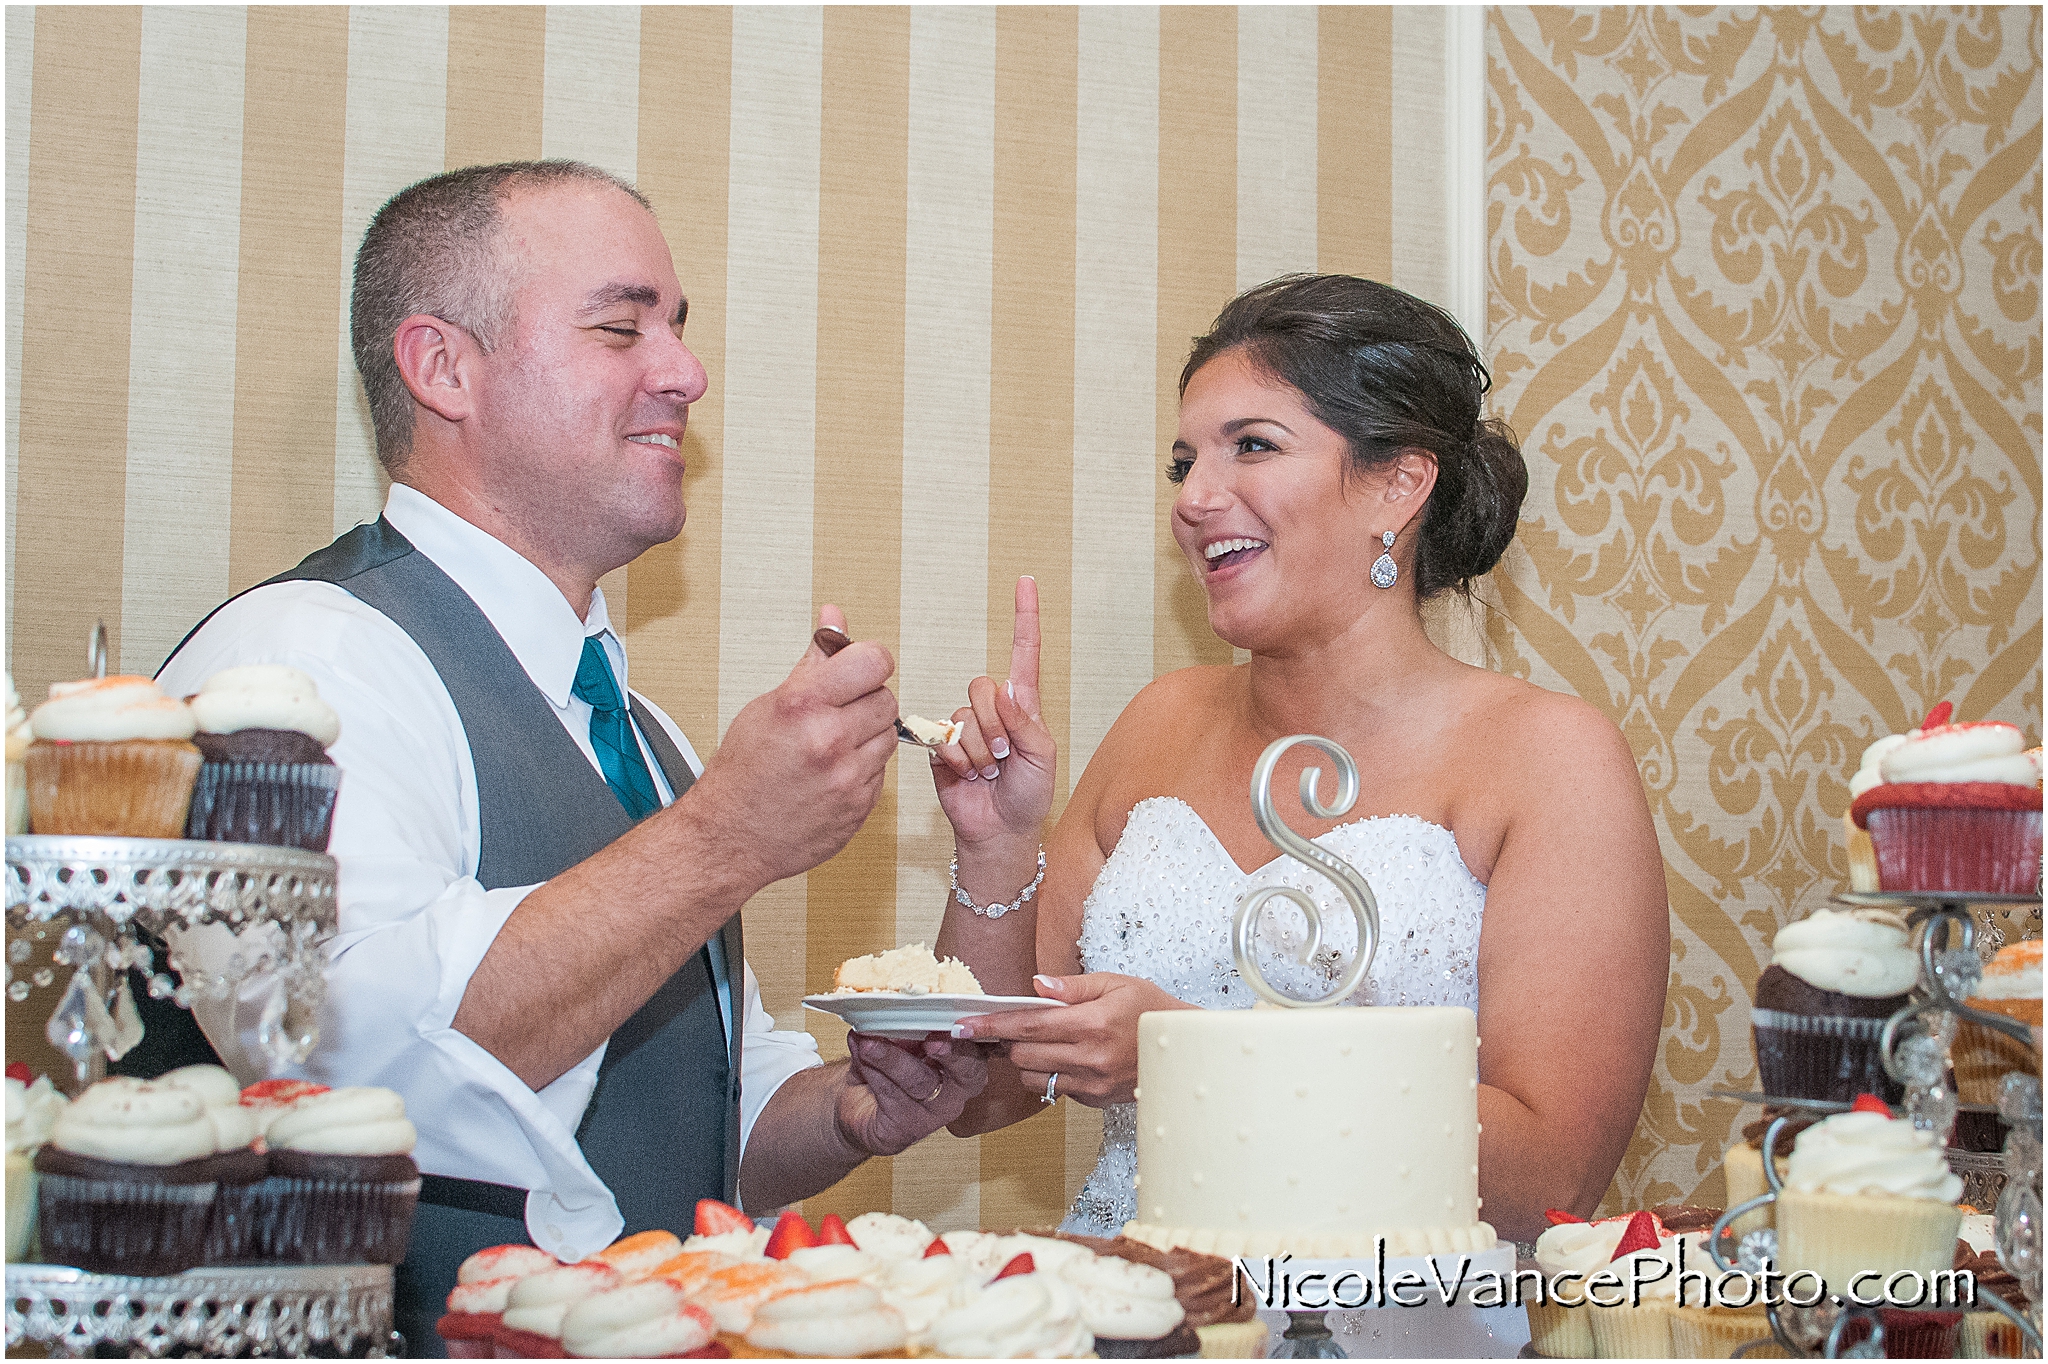 The bride and groom cut their wedding cake provided by Pearls at Virginia Crossings.